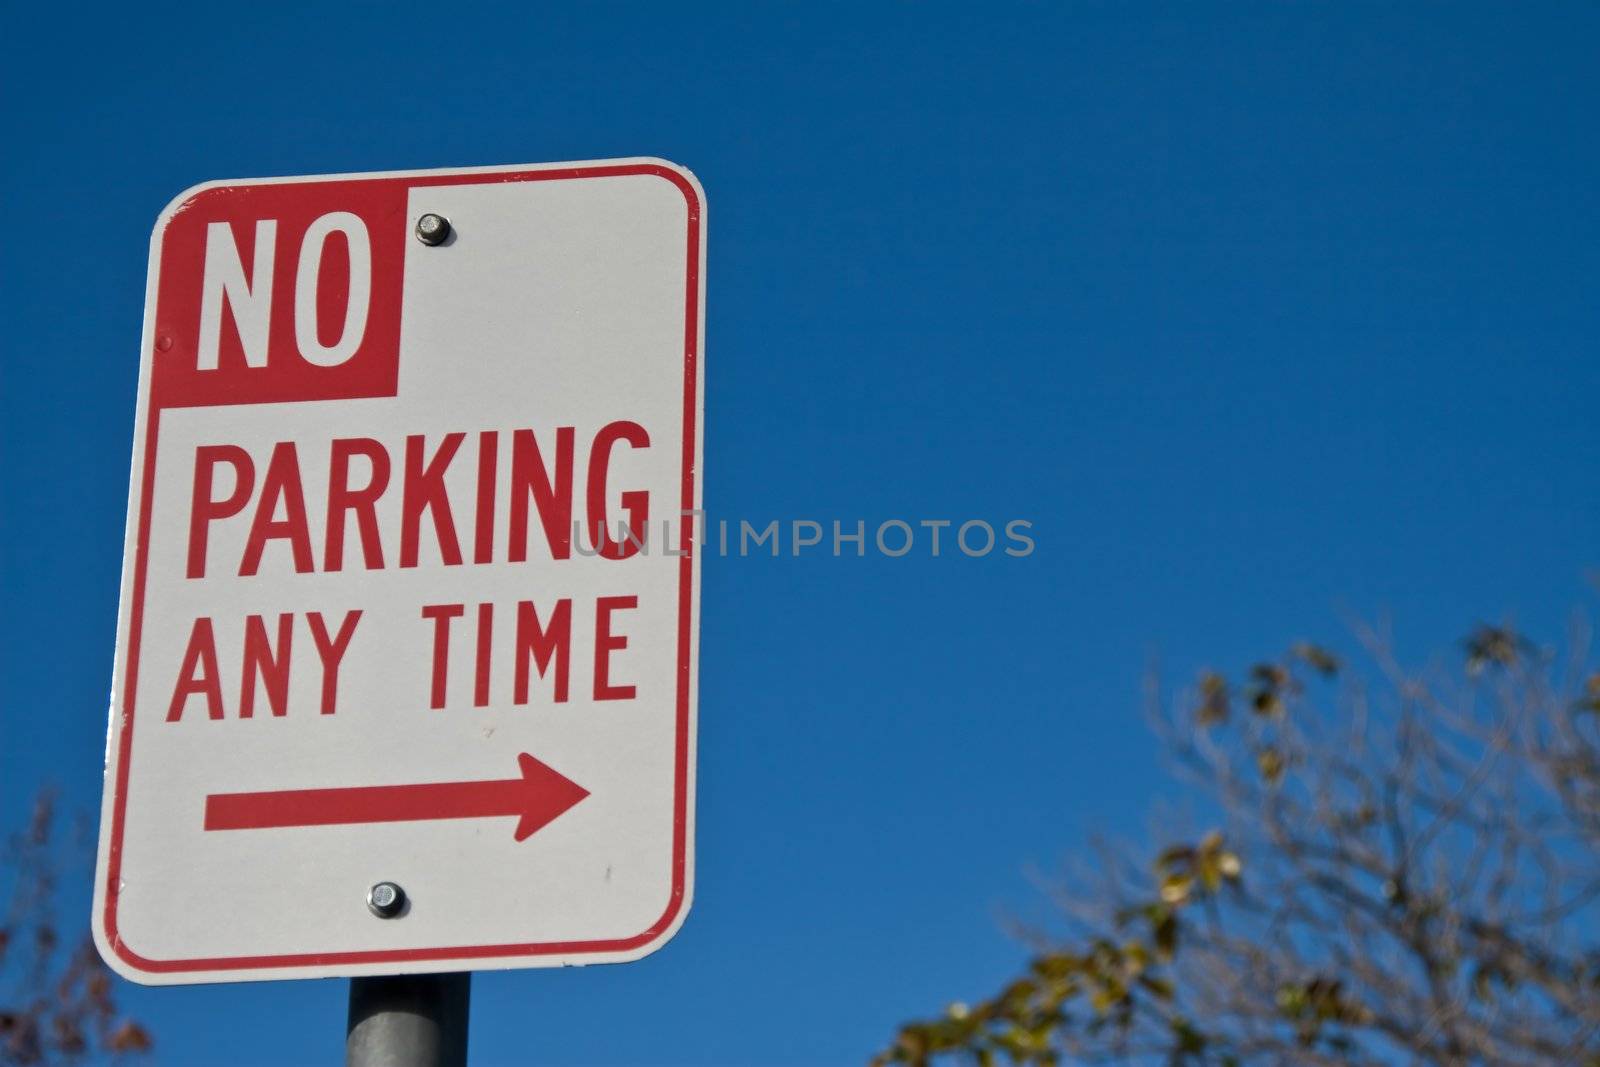 No parking any time by timscottrom